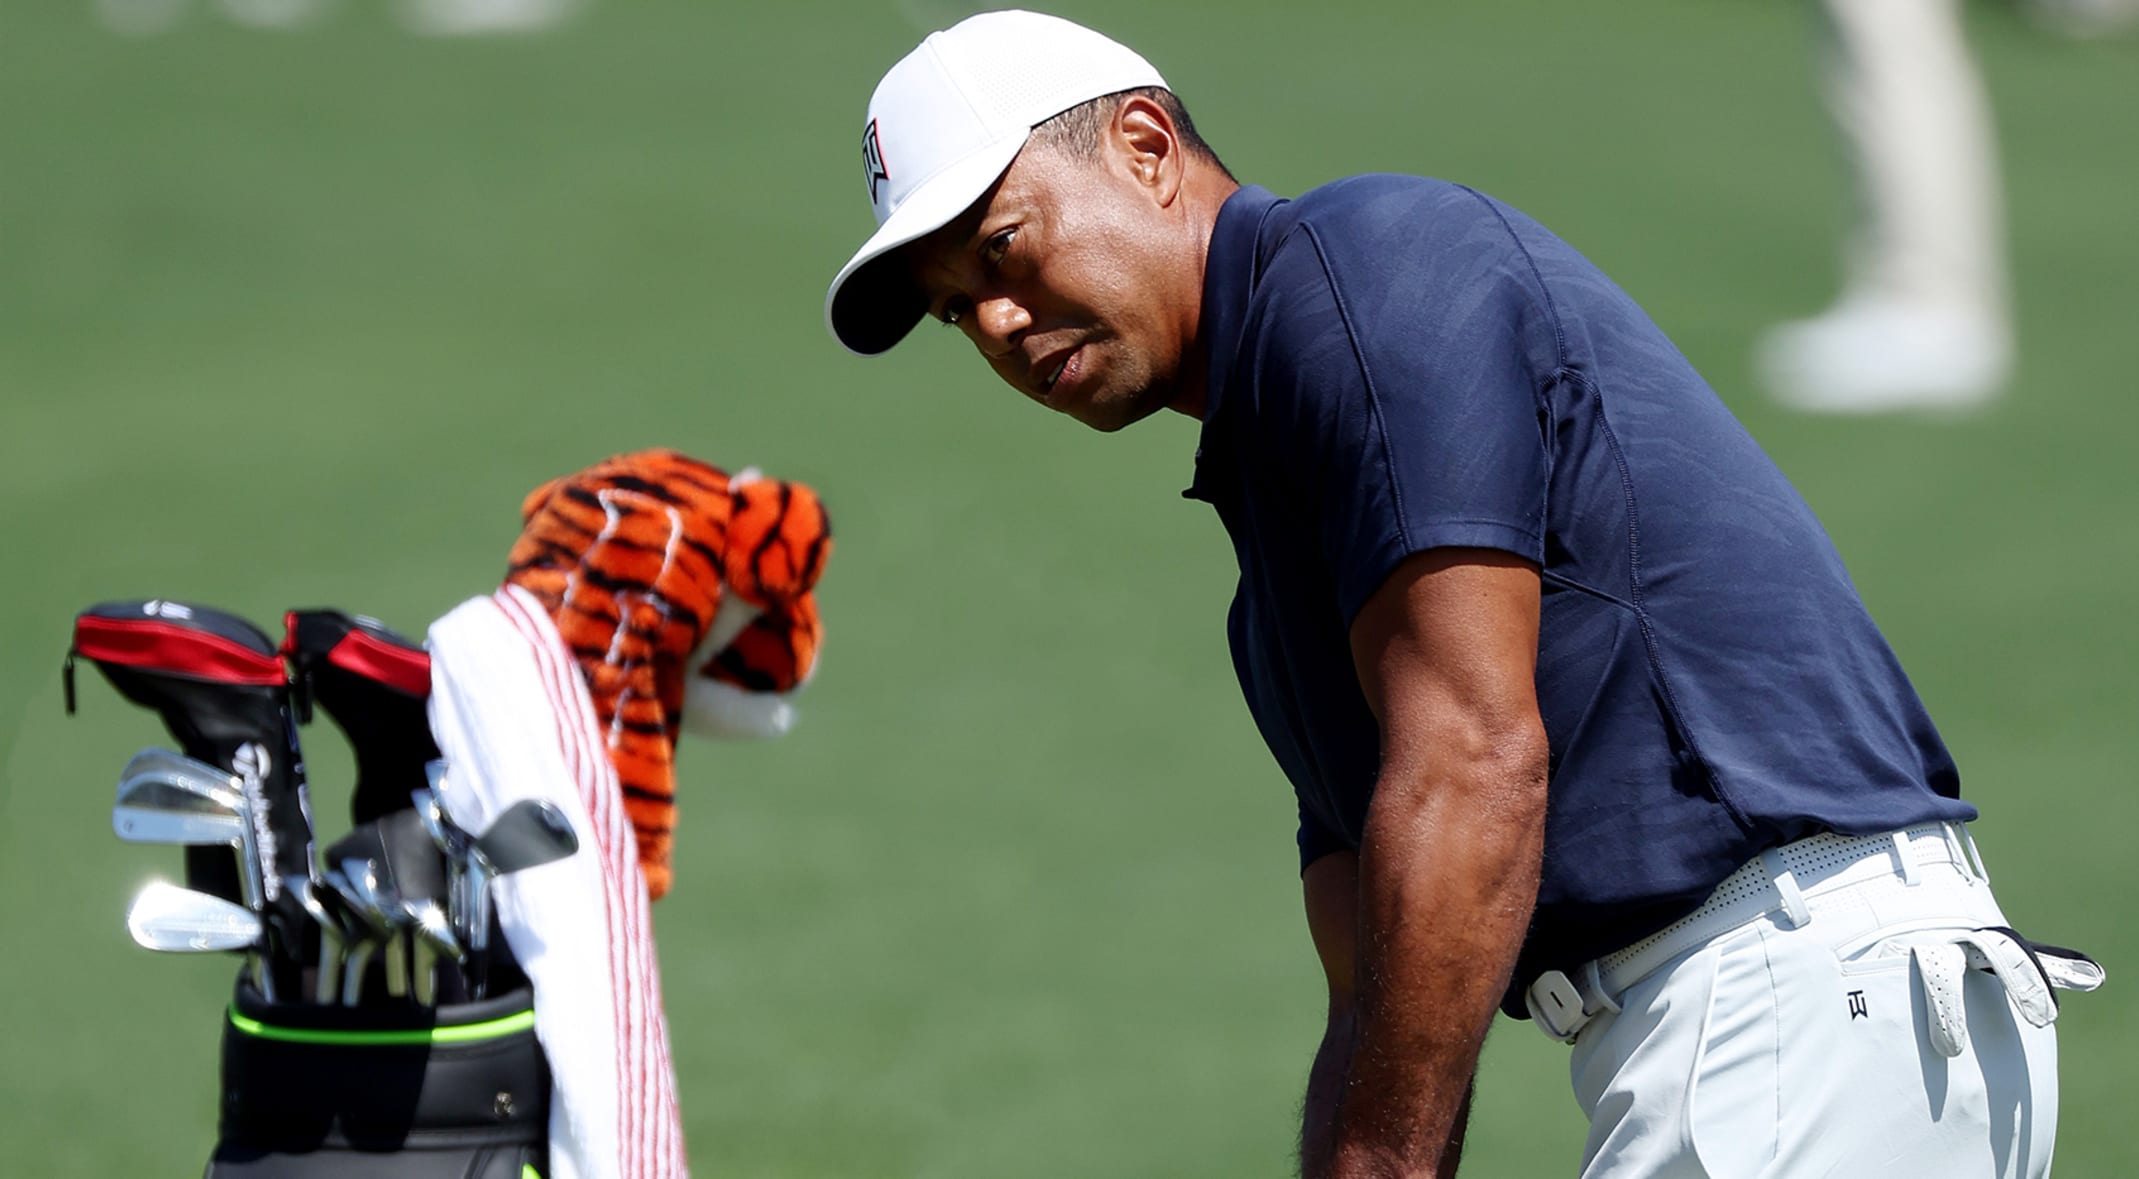 A look at Tiger Woods' equipment for the Masters